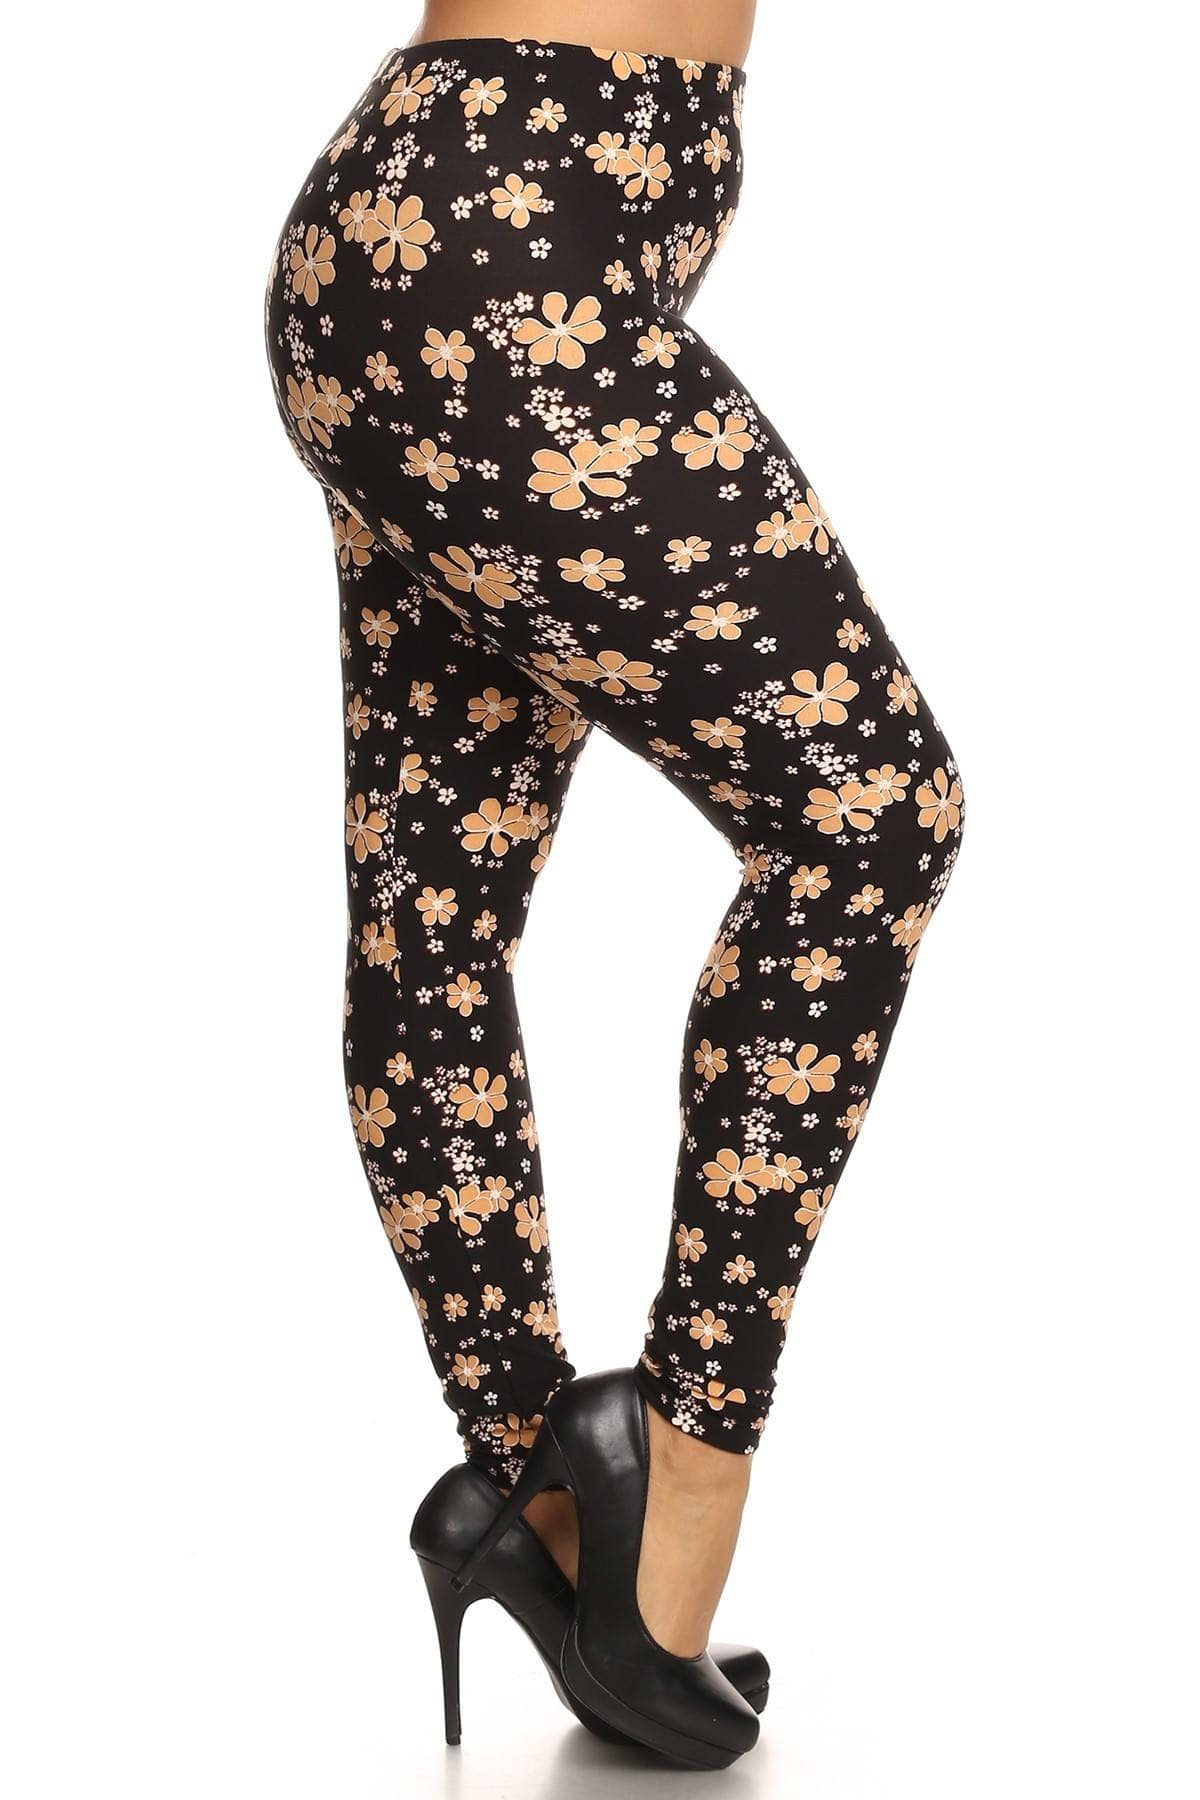 Super Soft Peach Skin Fabric, Floral Graphic Printed Knit Legging With Elastic Waist Detail. High Waist Fit - Fashion Quality Boutik